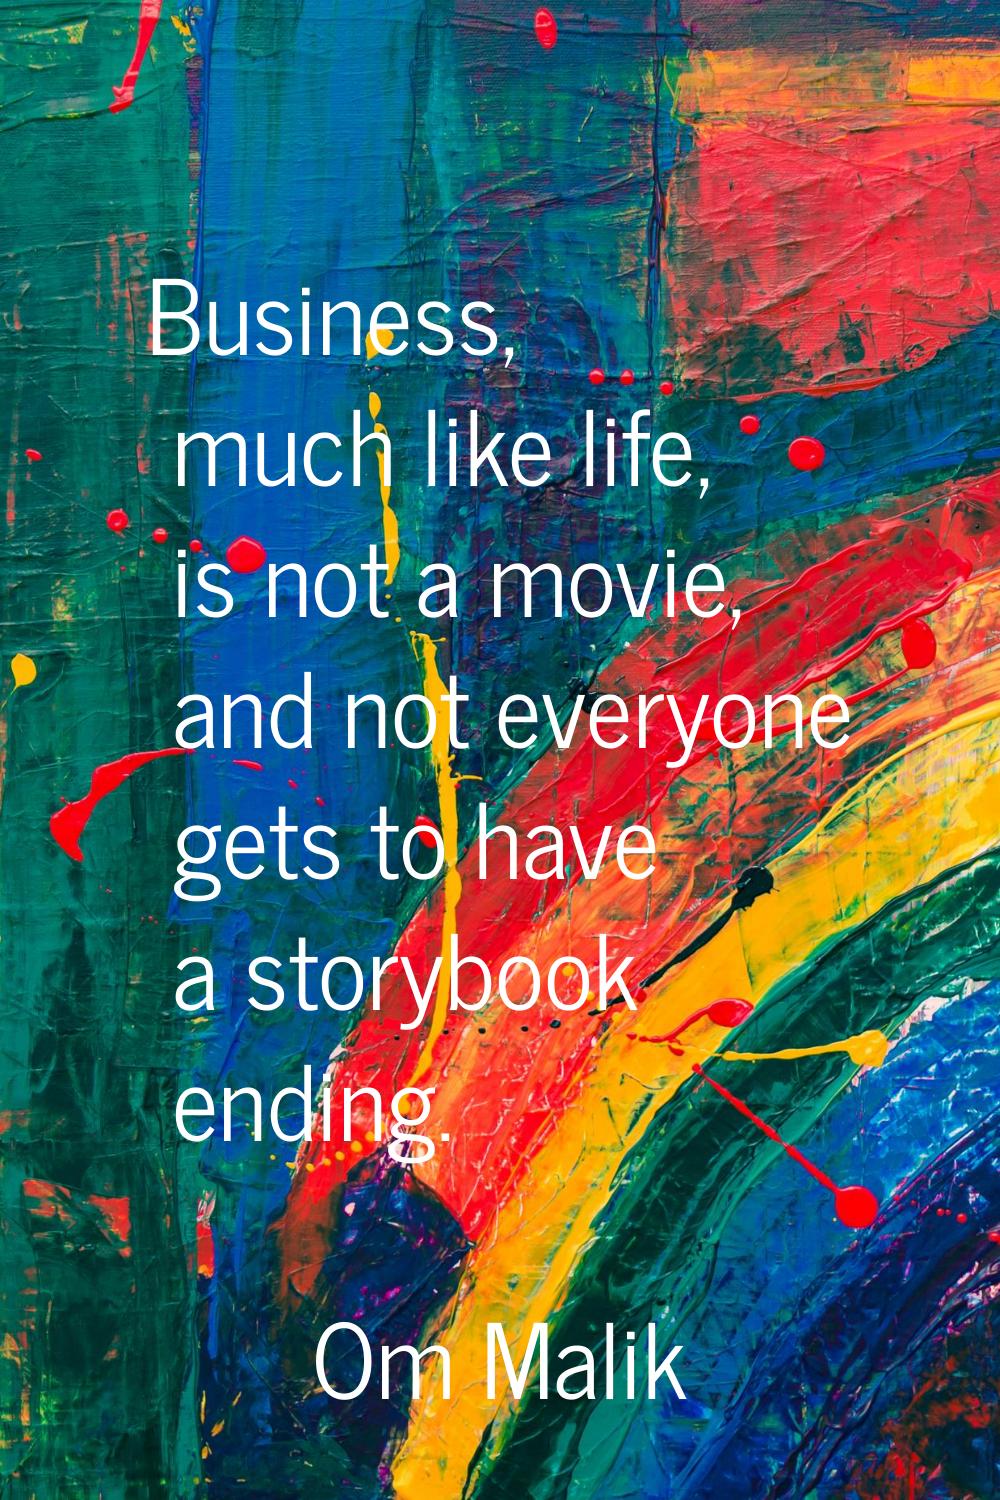 Business, much like life, is not a movie, and not everyone gets to have a storybook ending.